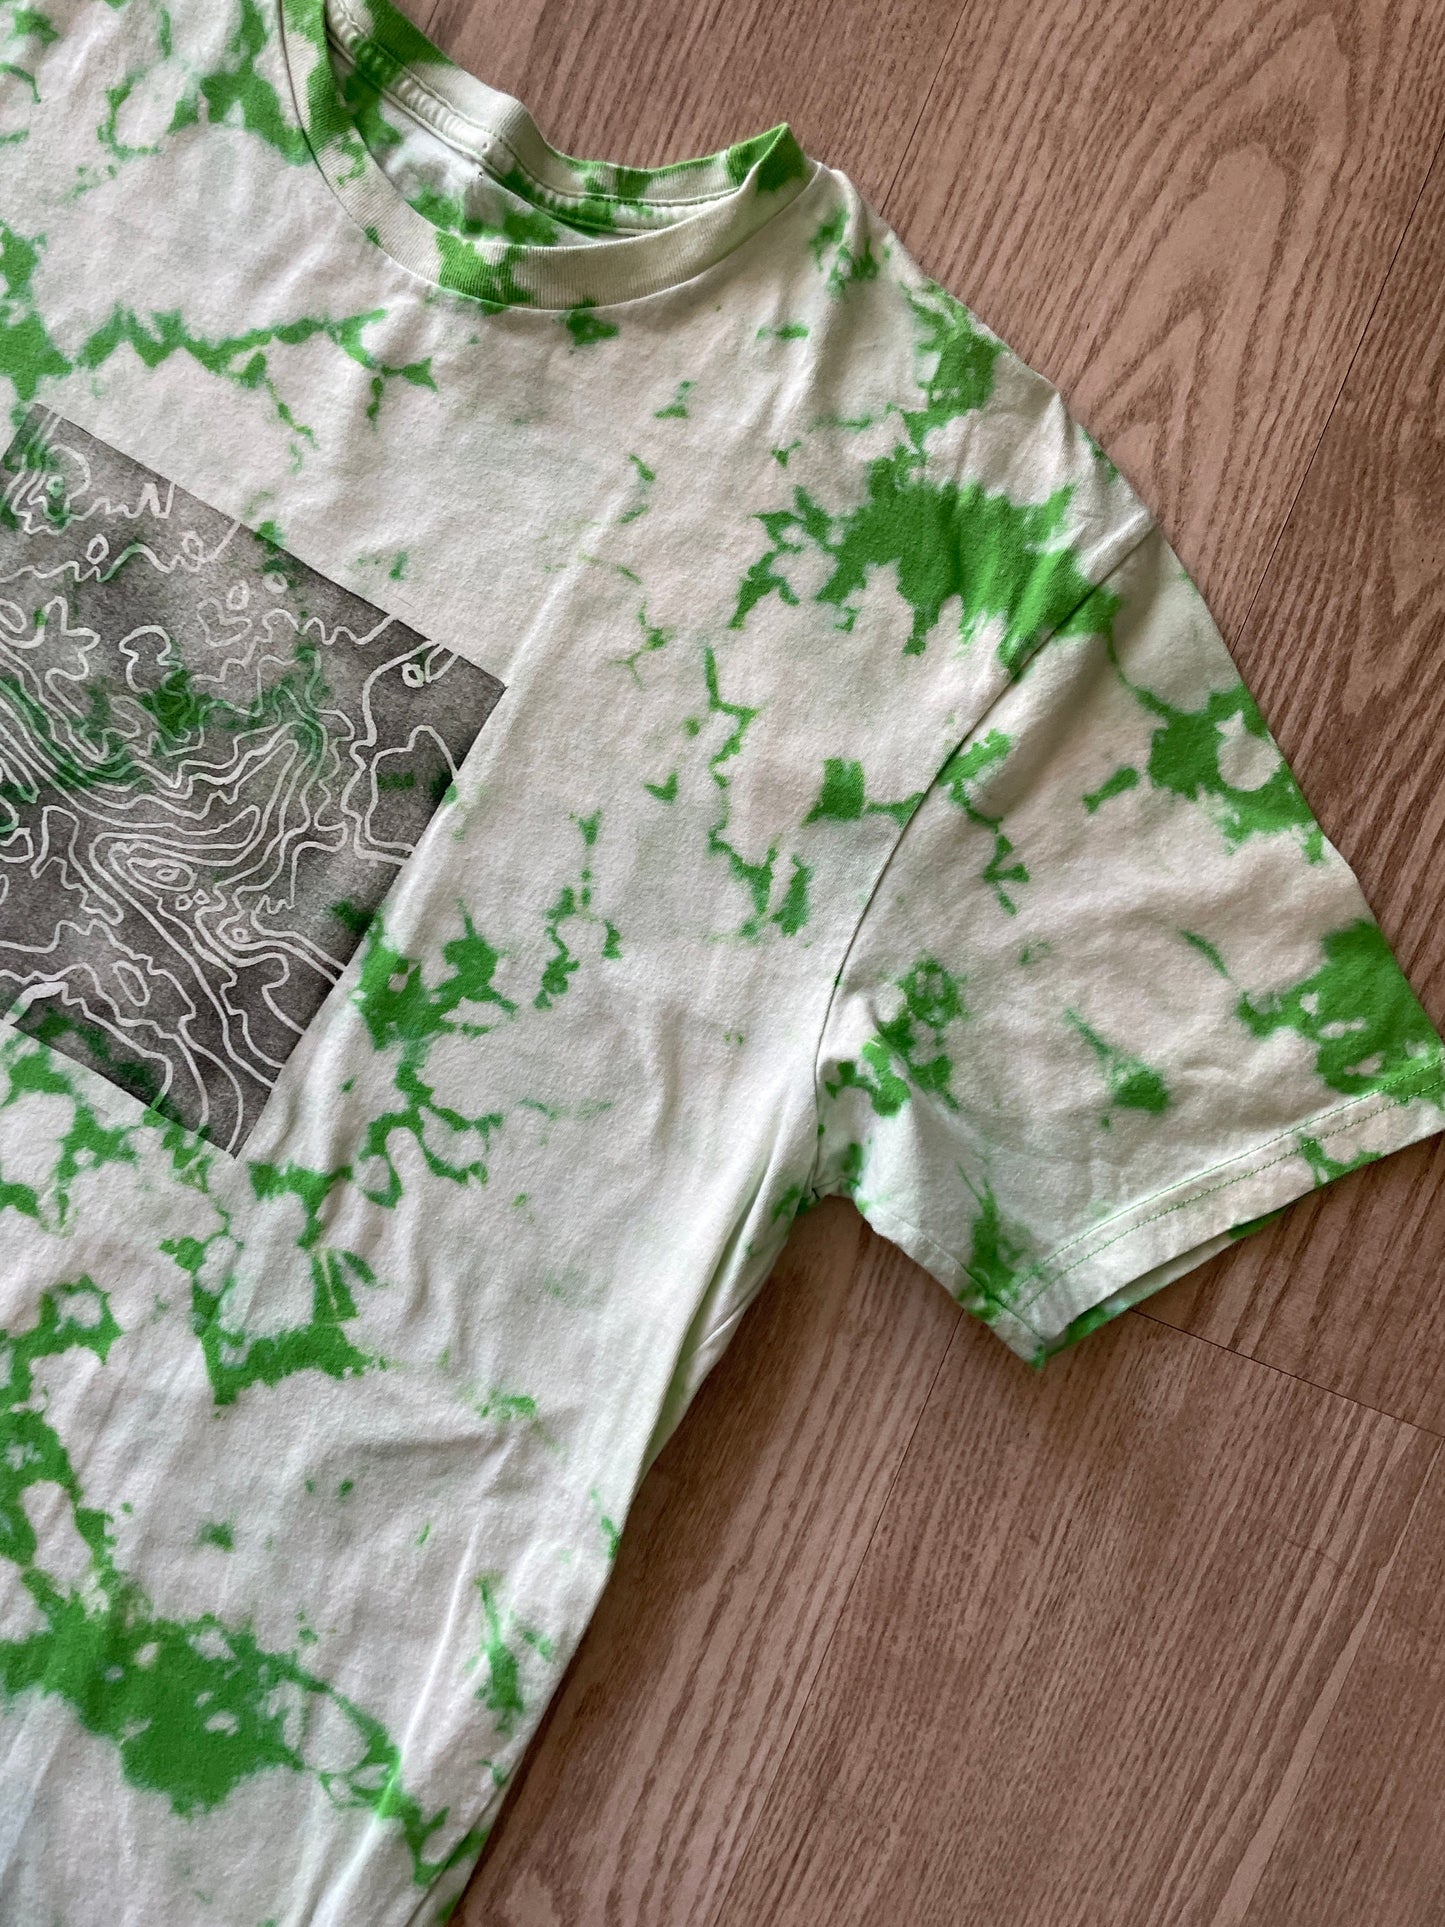 Large Men's Hand-Printed Delicate Arch Topo Map Reverse Tie Dye Short Sleeve T-Shirt | Handmade One-Of-a-Kind Upcycled Green and White Top